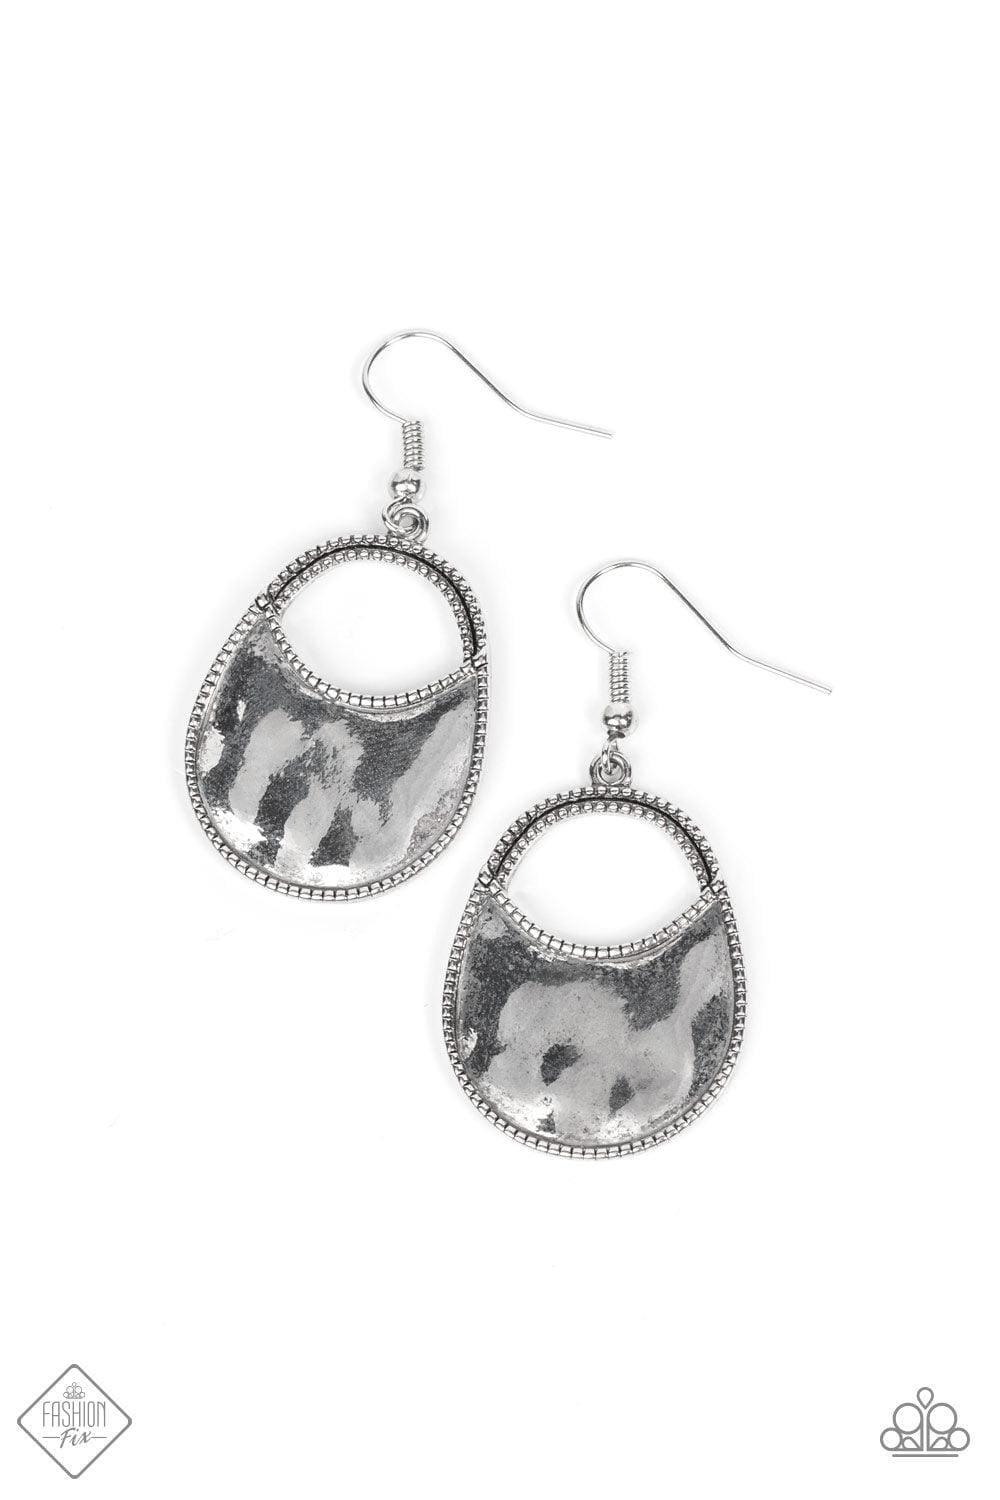 Paparazzi Accessories - Rio Rancho Relic - Silver Earrings - Bling by JessieK